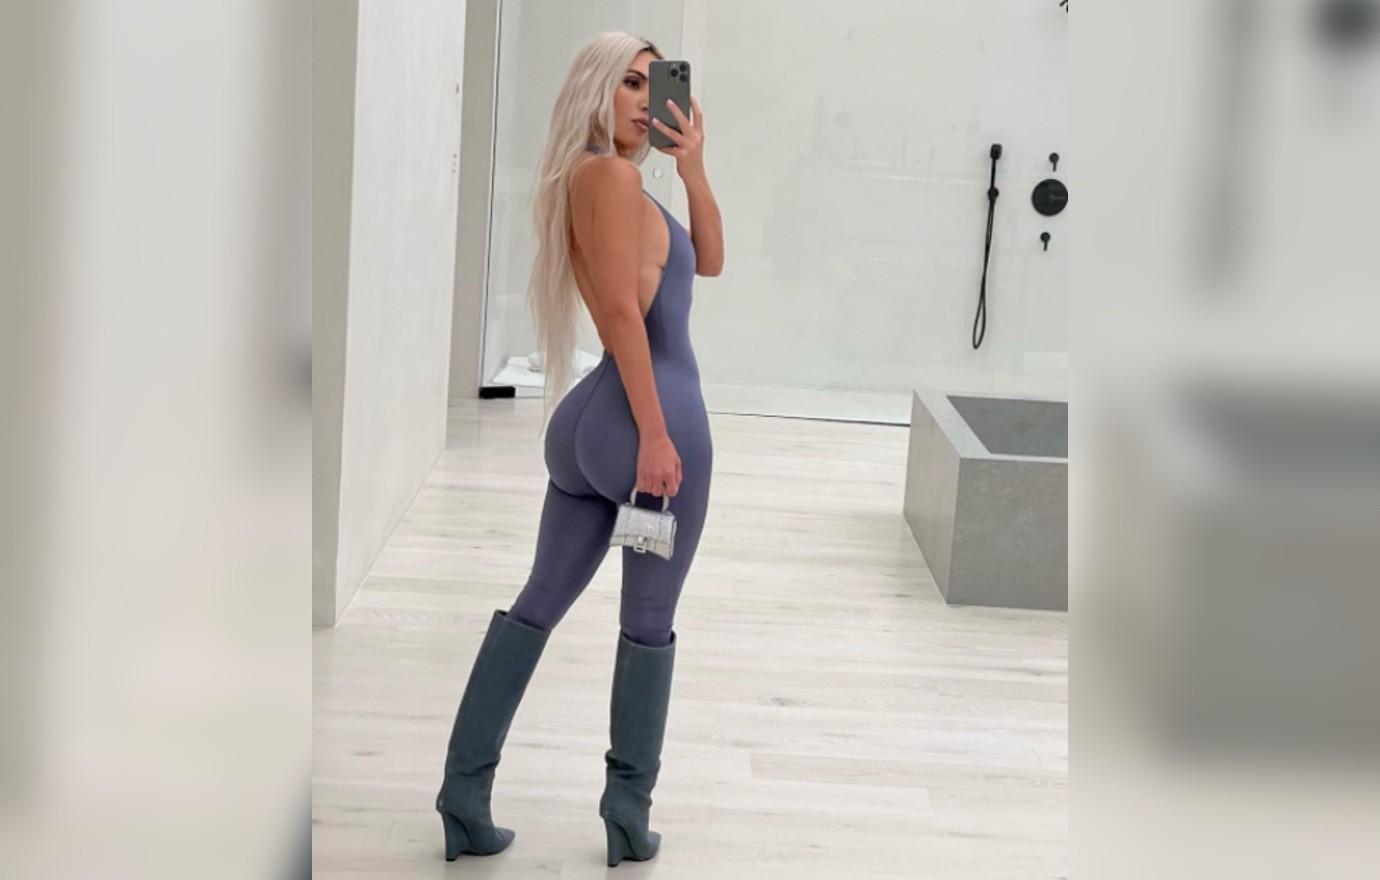 Kim Kardashian shows signature curves in SKIMS bodysuit as she talks being  'unkind' to family on SNL